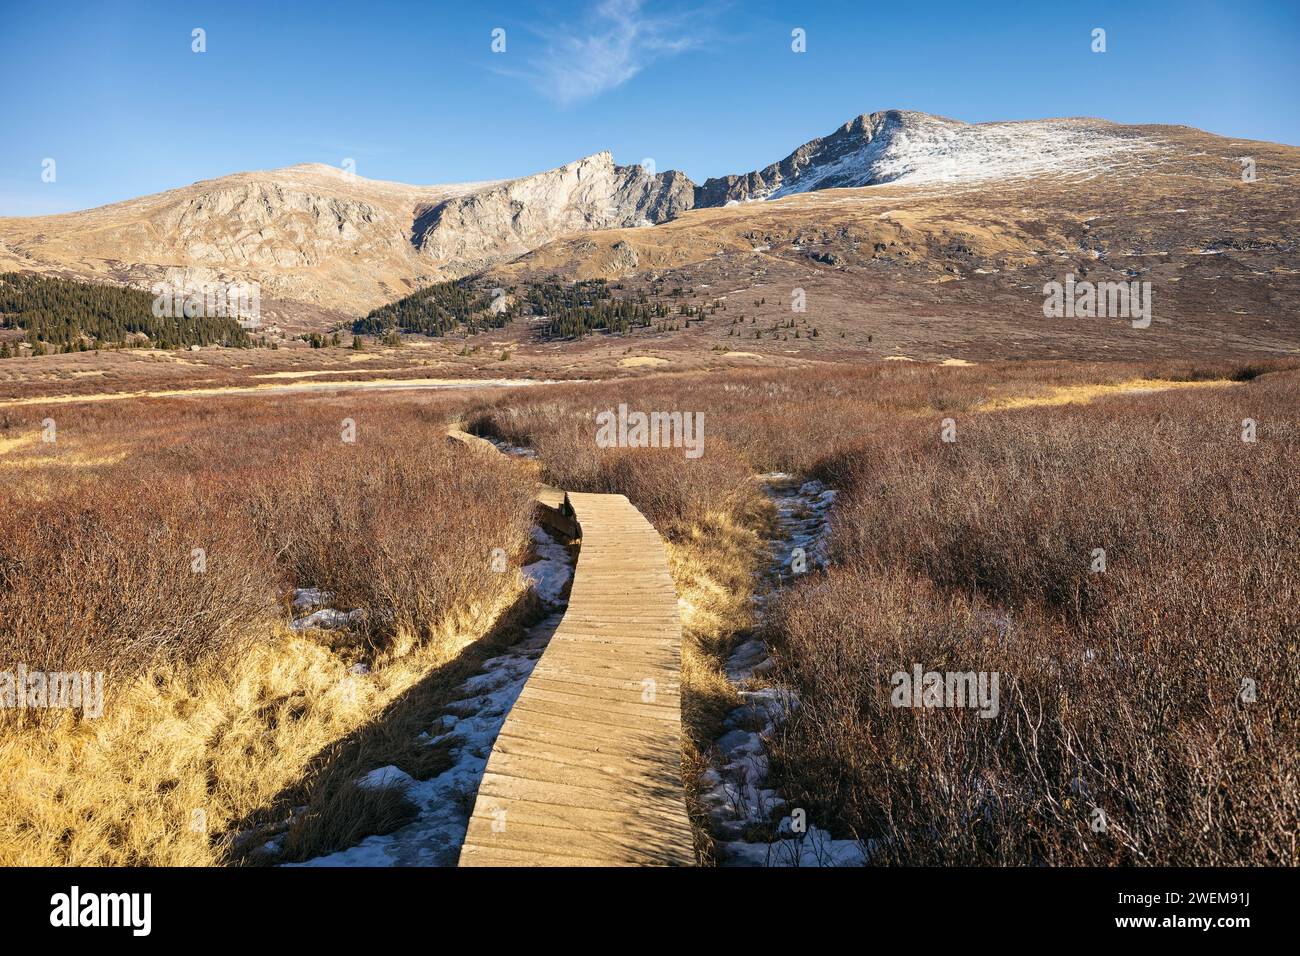 Hiking trail leading up Mount Bierstadt, Colorado Stock Photo